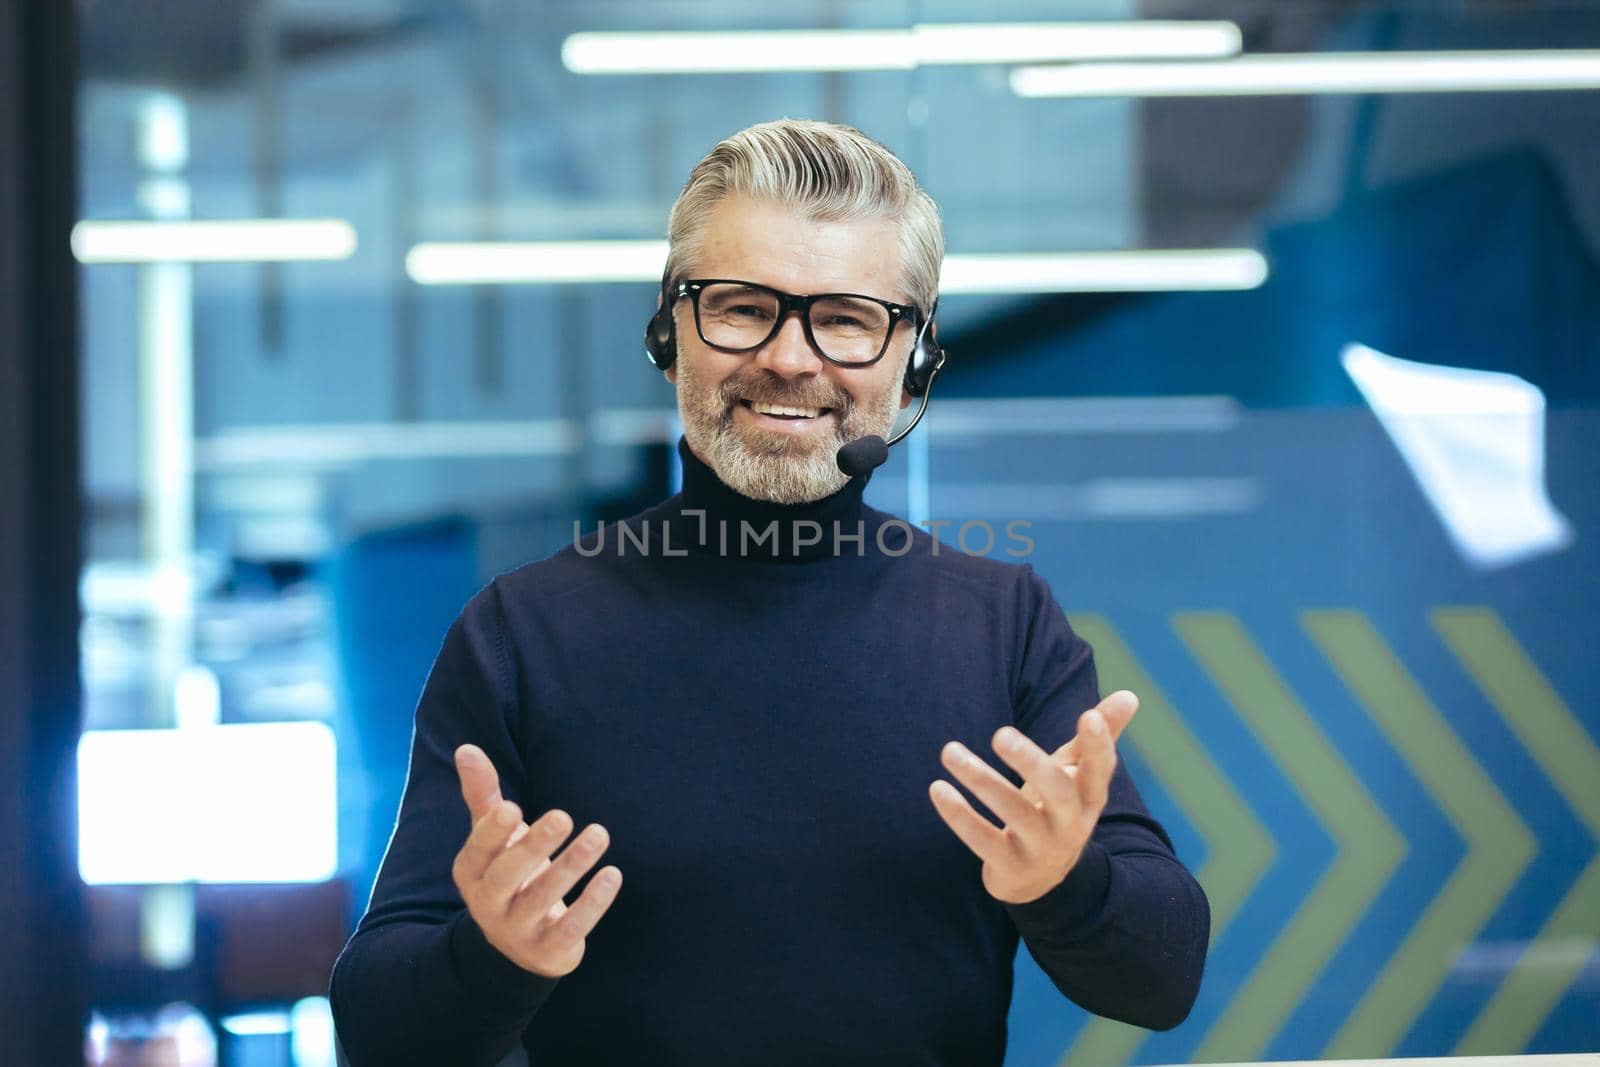 Online training. A man in headphones with a microphone conducts an online meeting, webinar on camera by voronaman